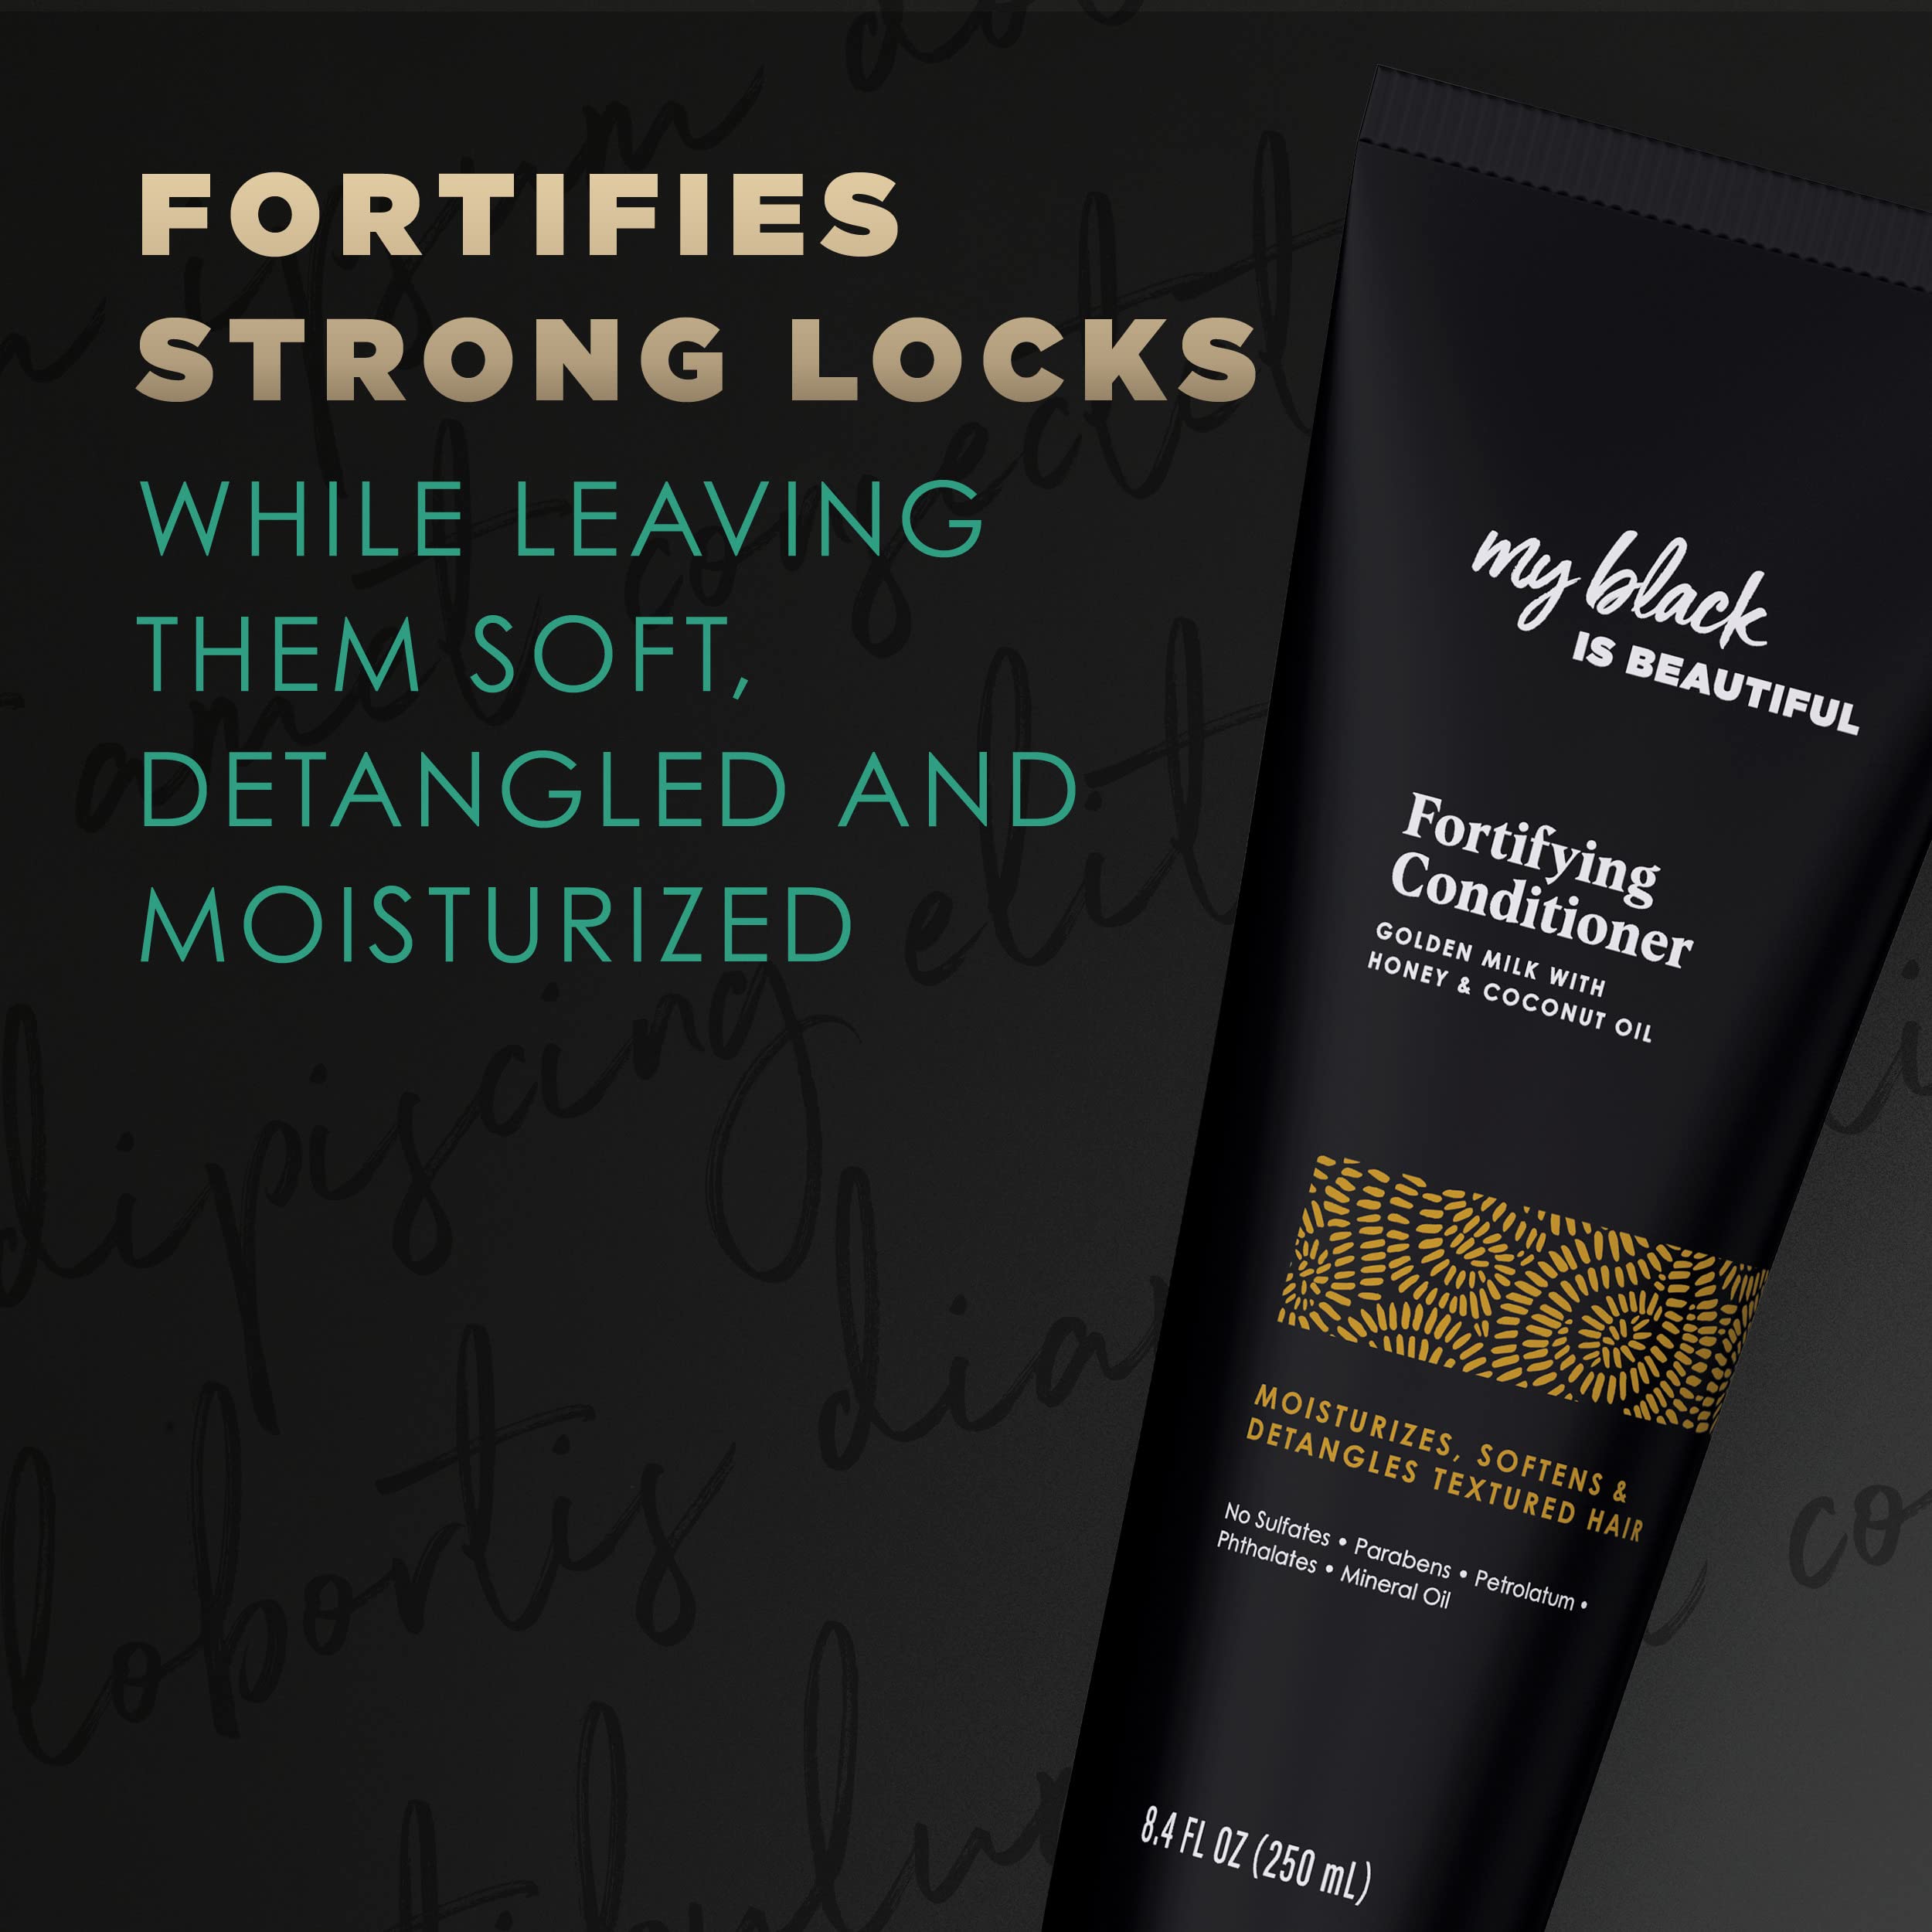 My Black is Beautiful Golden Milk Fortifying Conditioner, 8.4 Fl Oz — Sulfate Free, Moisturizing Conditioner for Curly and Coily Hair with Coconut Oil, Honey, and Turmeric (Packaging May Vary)